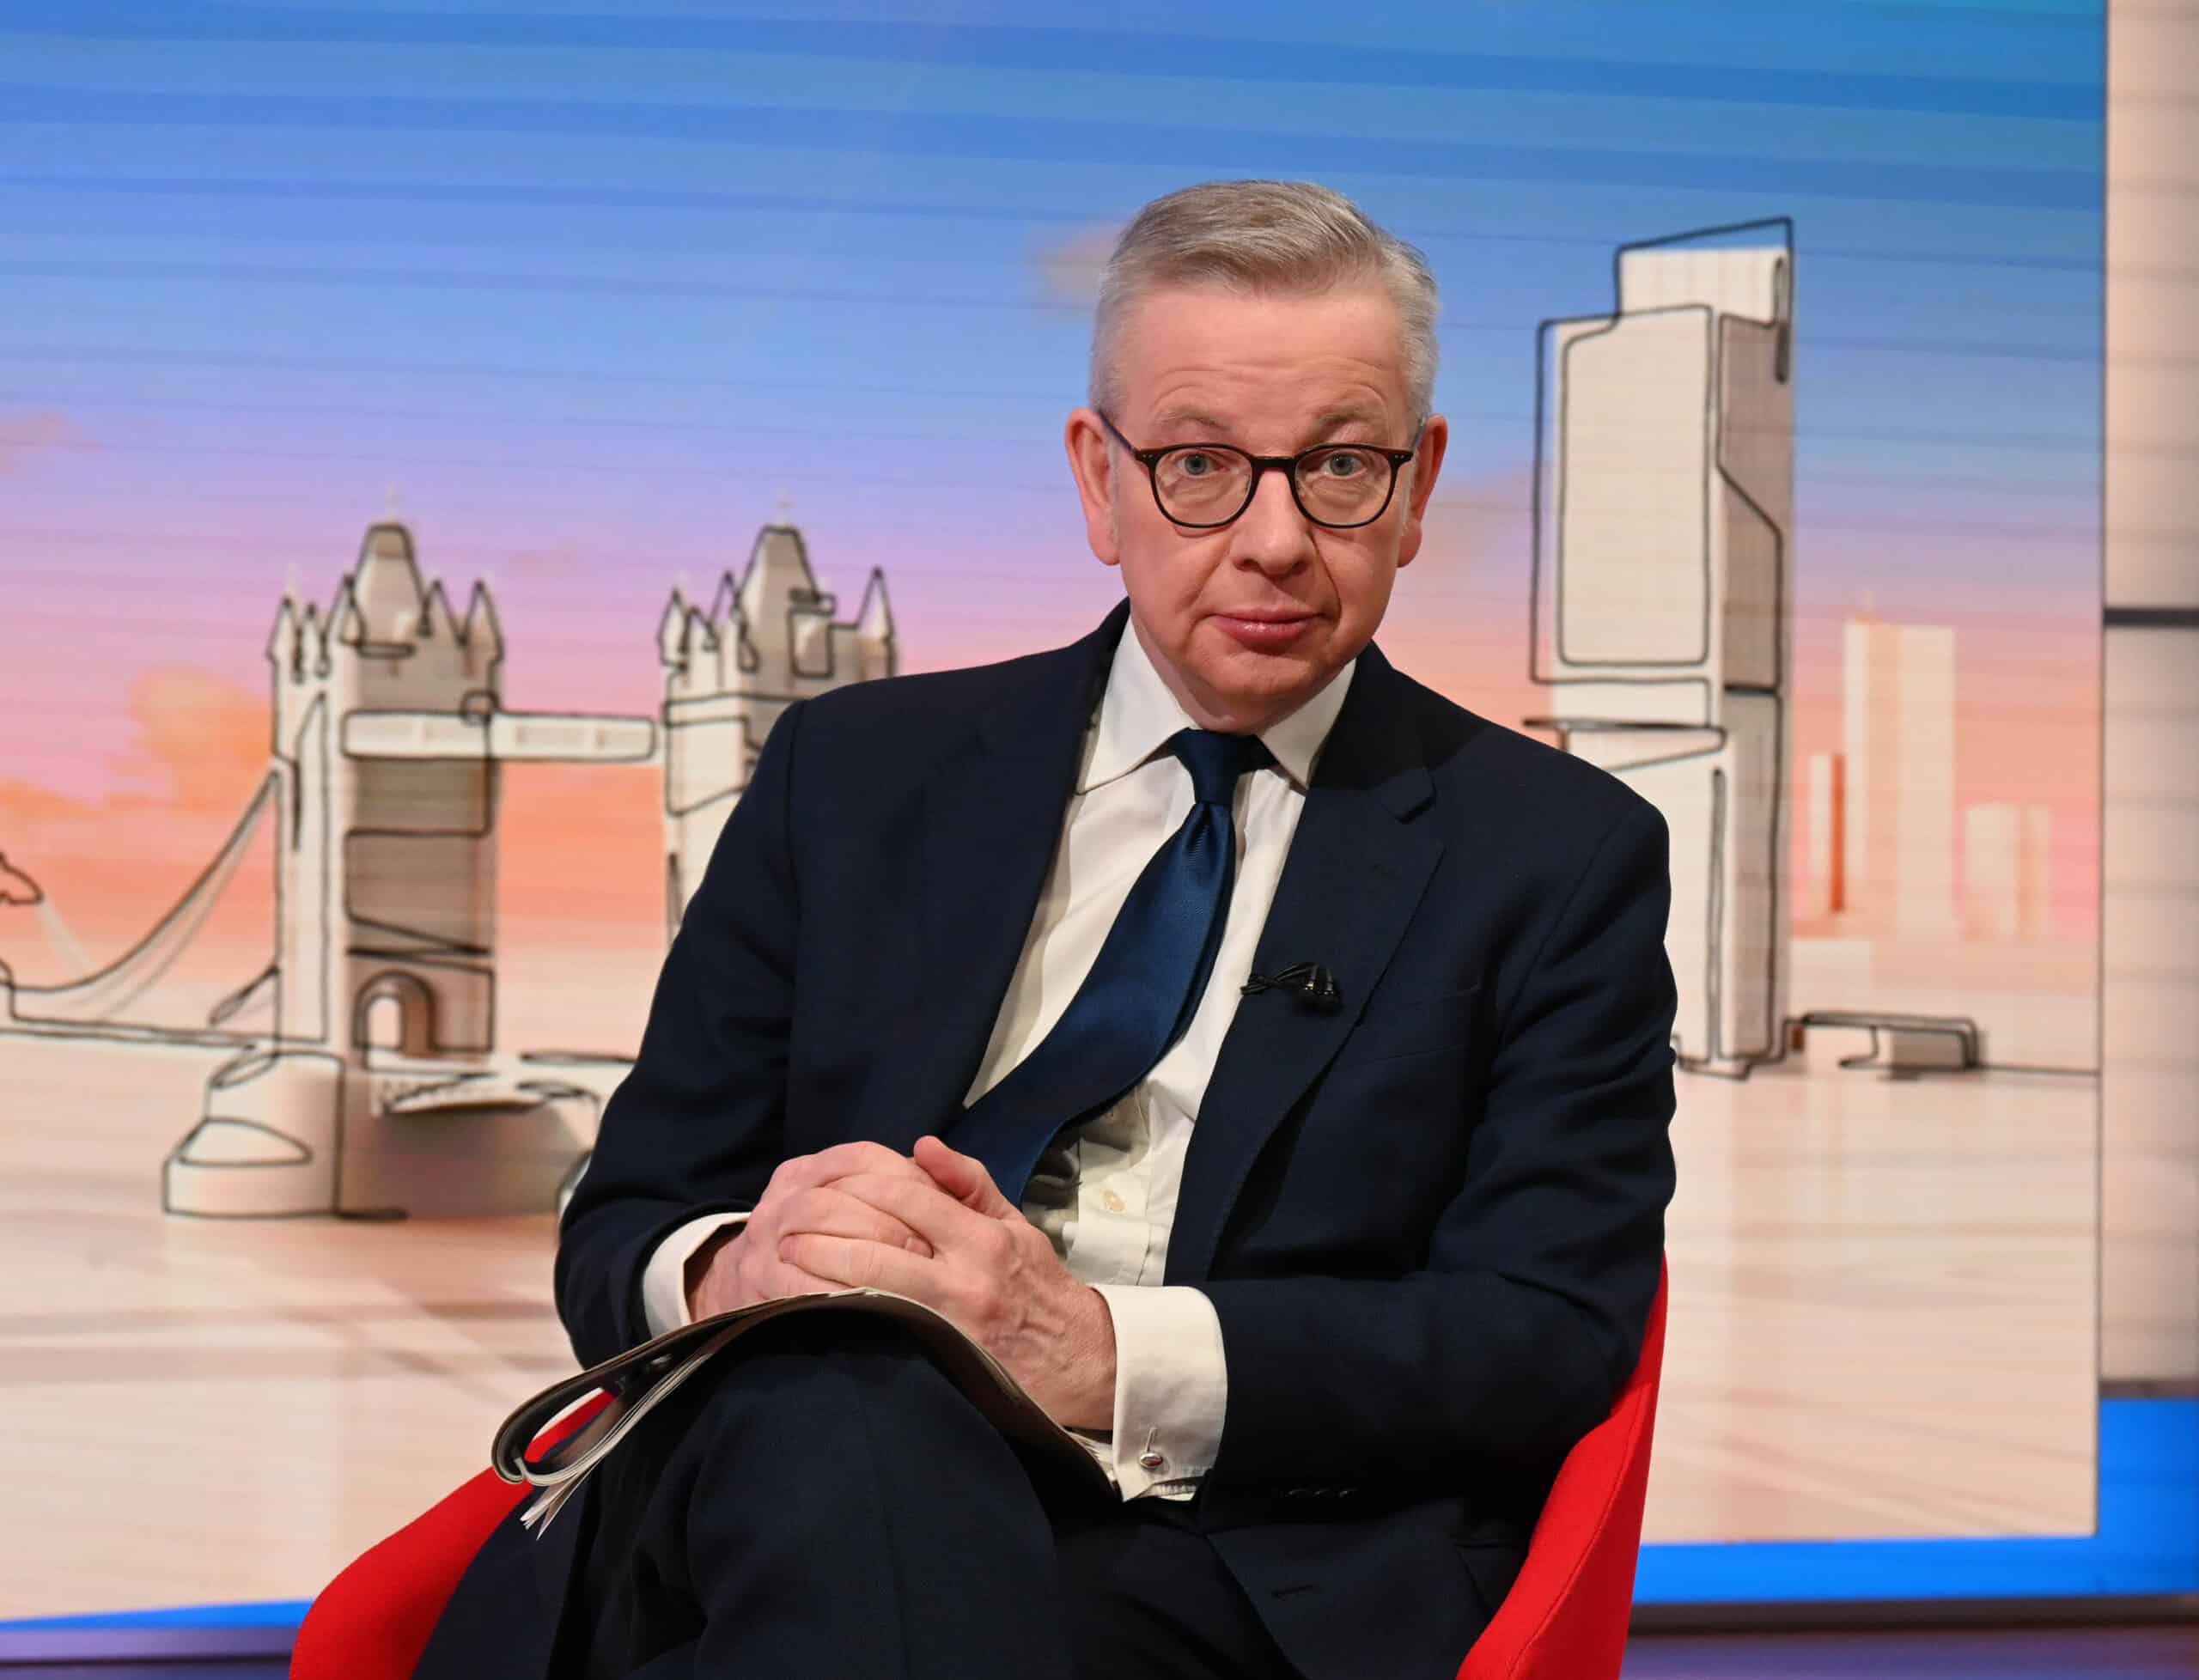 Michael Gove found guilty of standards breach